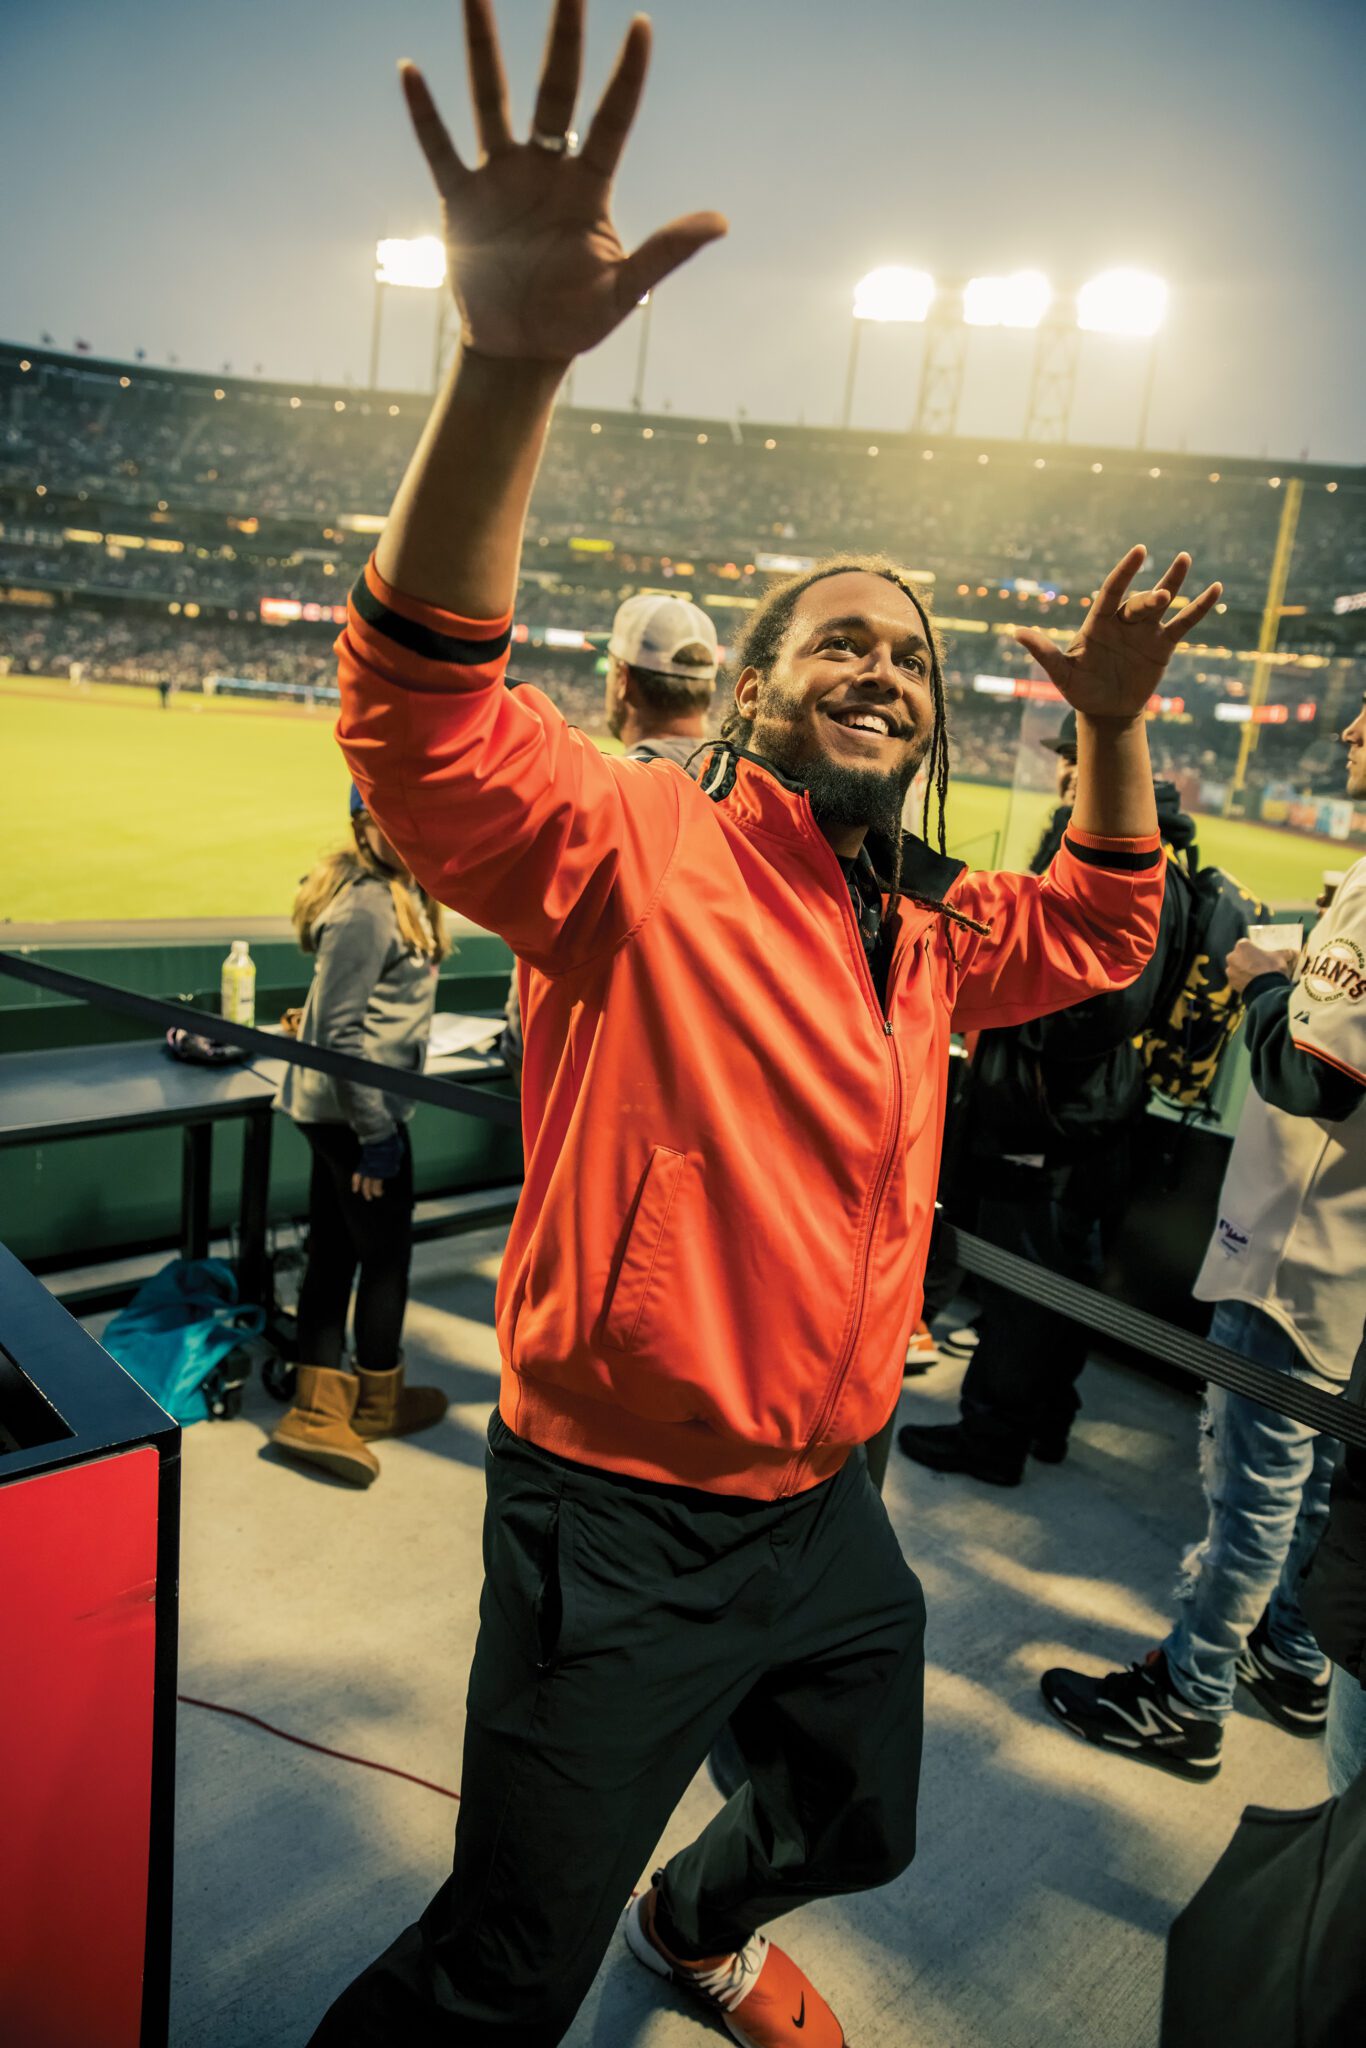 Zahid Peoples, a Mason with Martinez No. 41, gets the crowd going at a San Francisco Giants game.